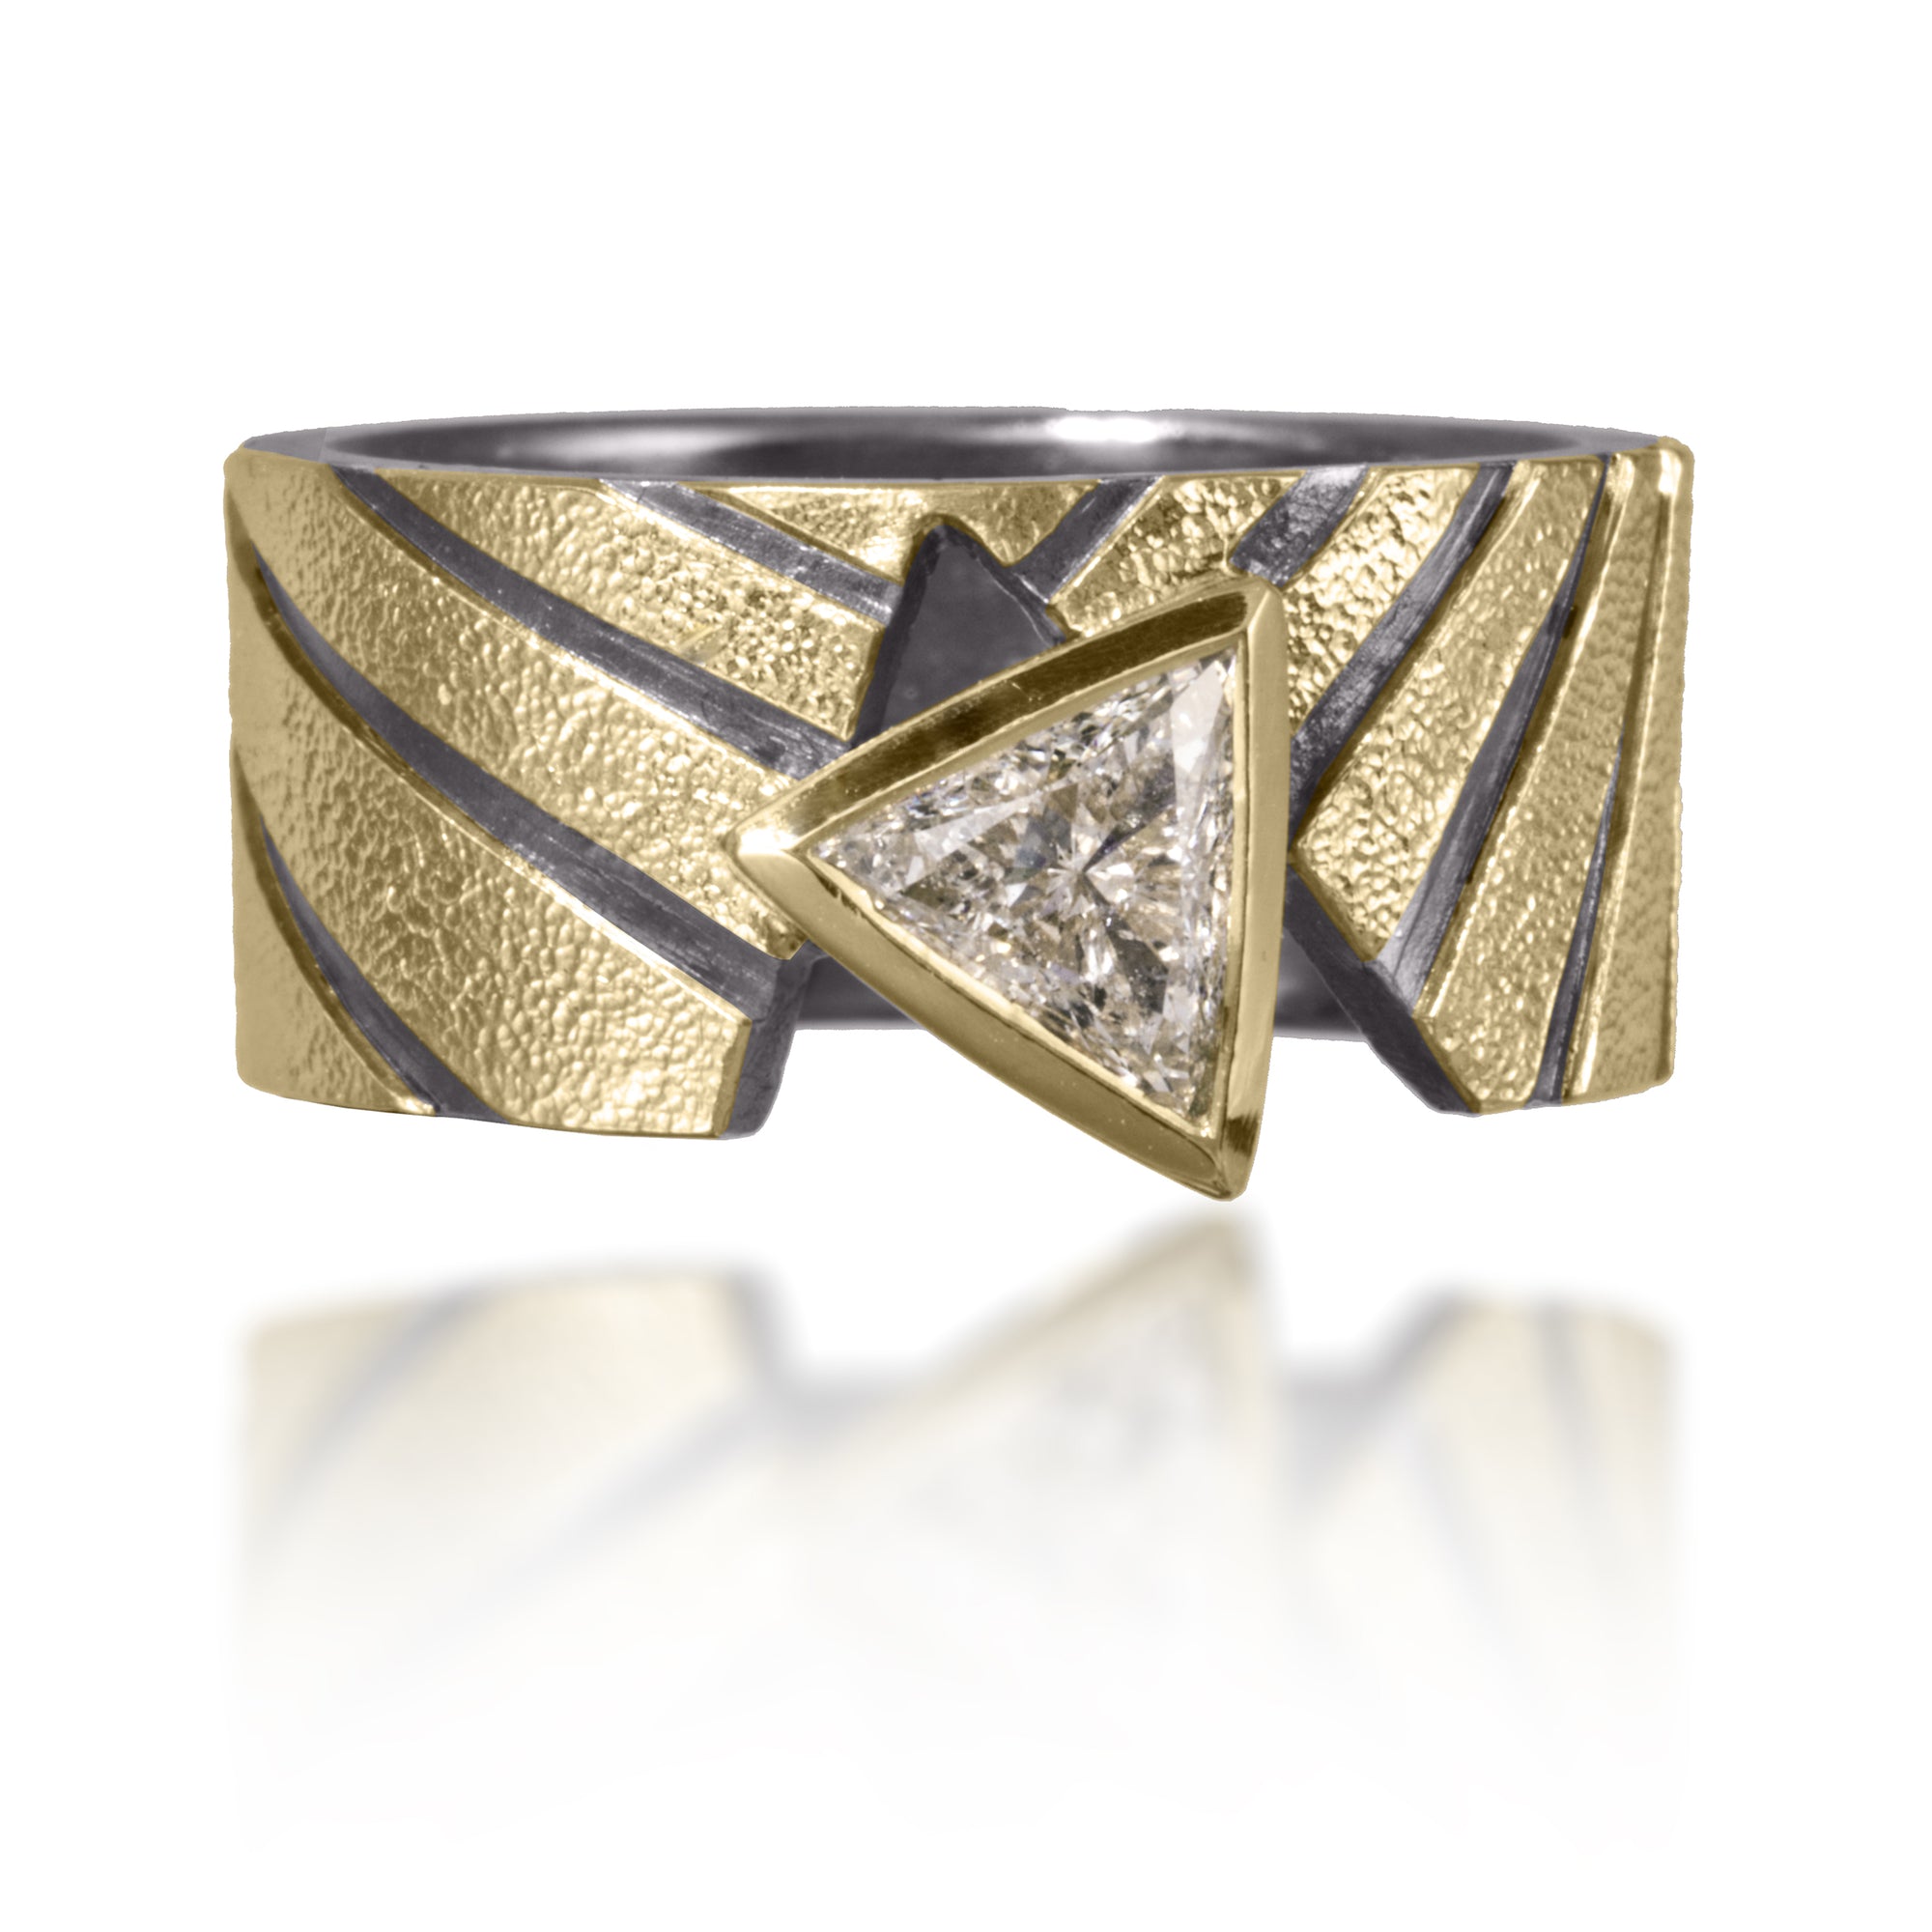 Stripe Ring #10 in 18k gold and oxidized sterling silver with bezel set, one of a kind, triangular cut diamond. Hand fabricated, stipple textured and engraved mixed metals. 9mm wide straight band with graduated, radial stripes, a low profile and very unique diamond, 0.49 tcw.